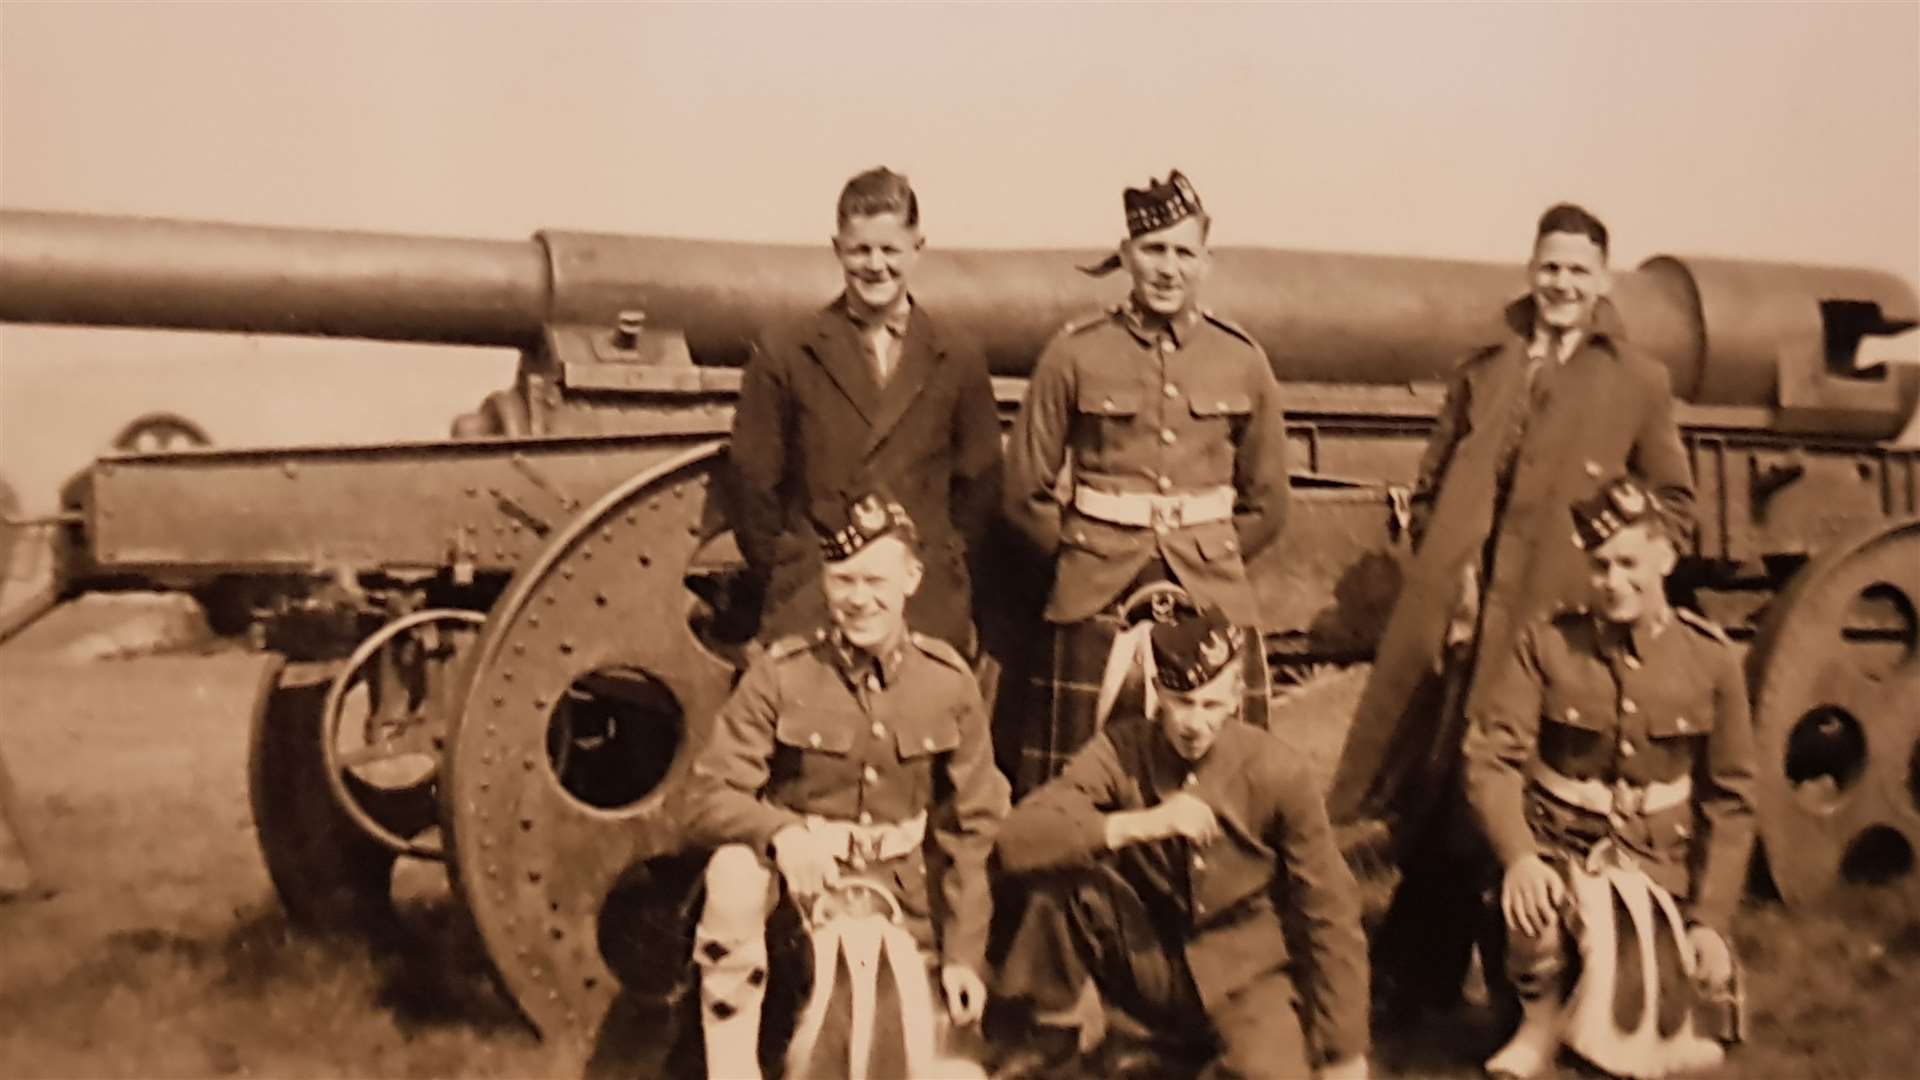 Don's photograph of friends at Fort George. Bernard Finn and Edward Clark are the on the left with their arms behind their back.